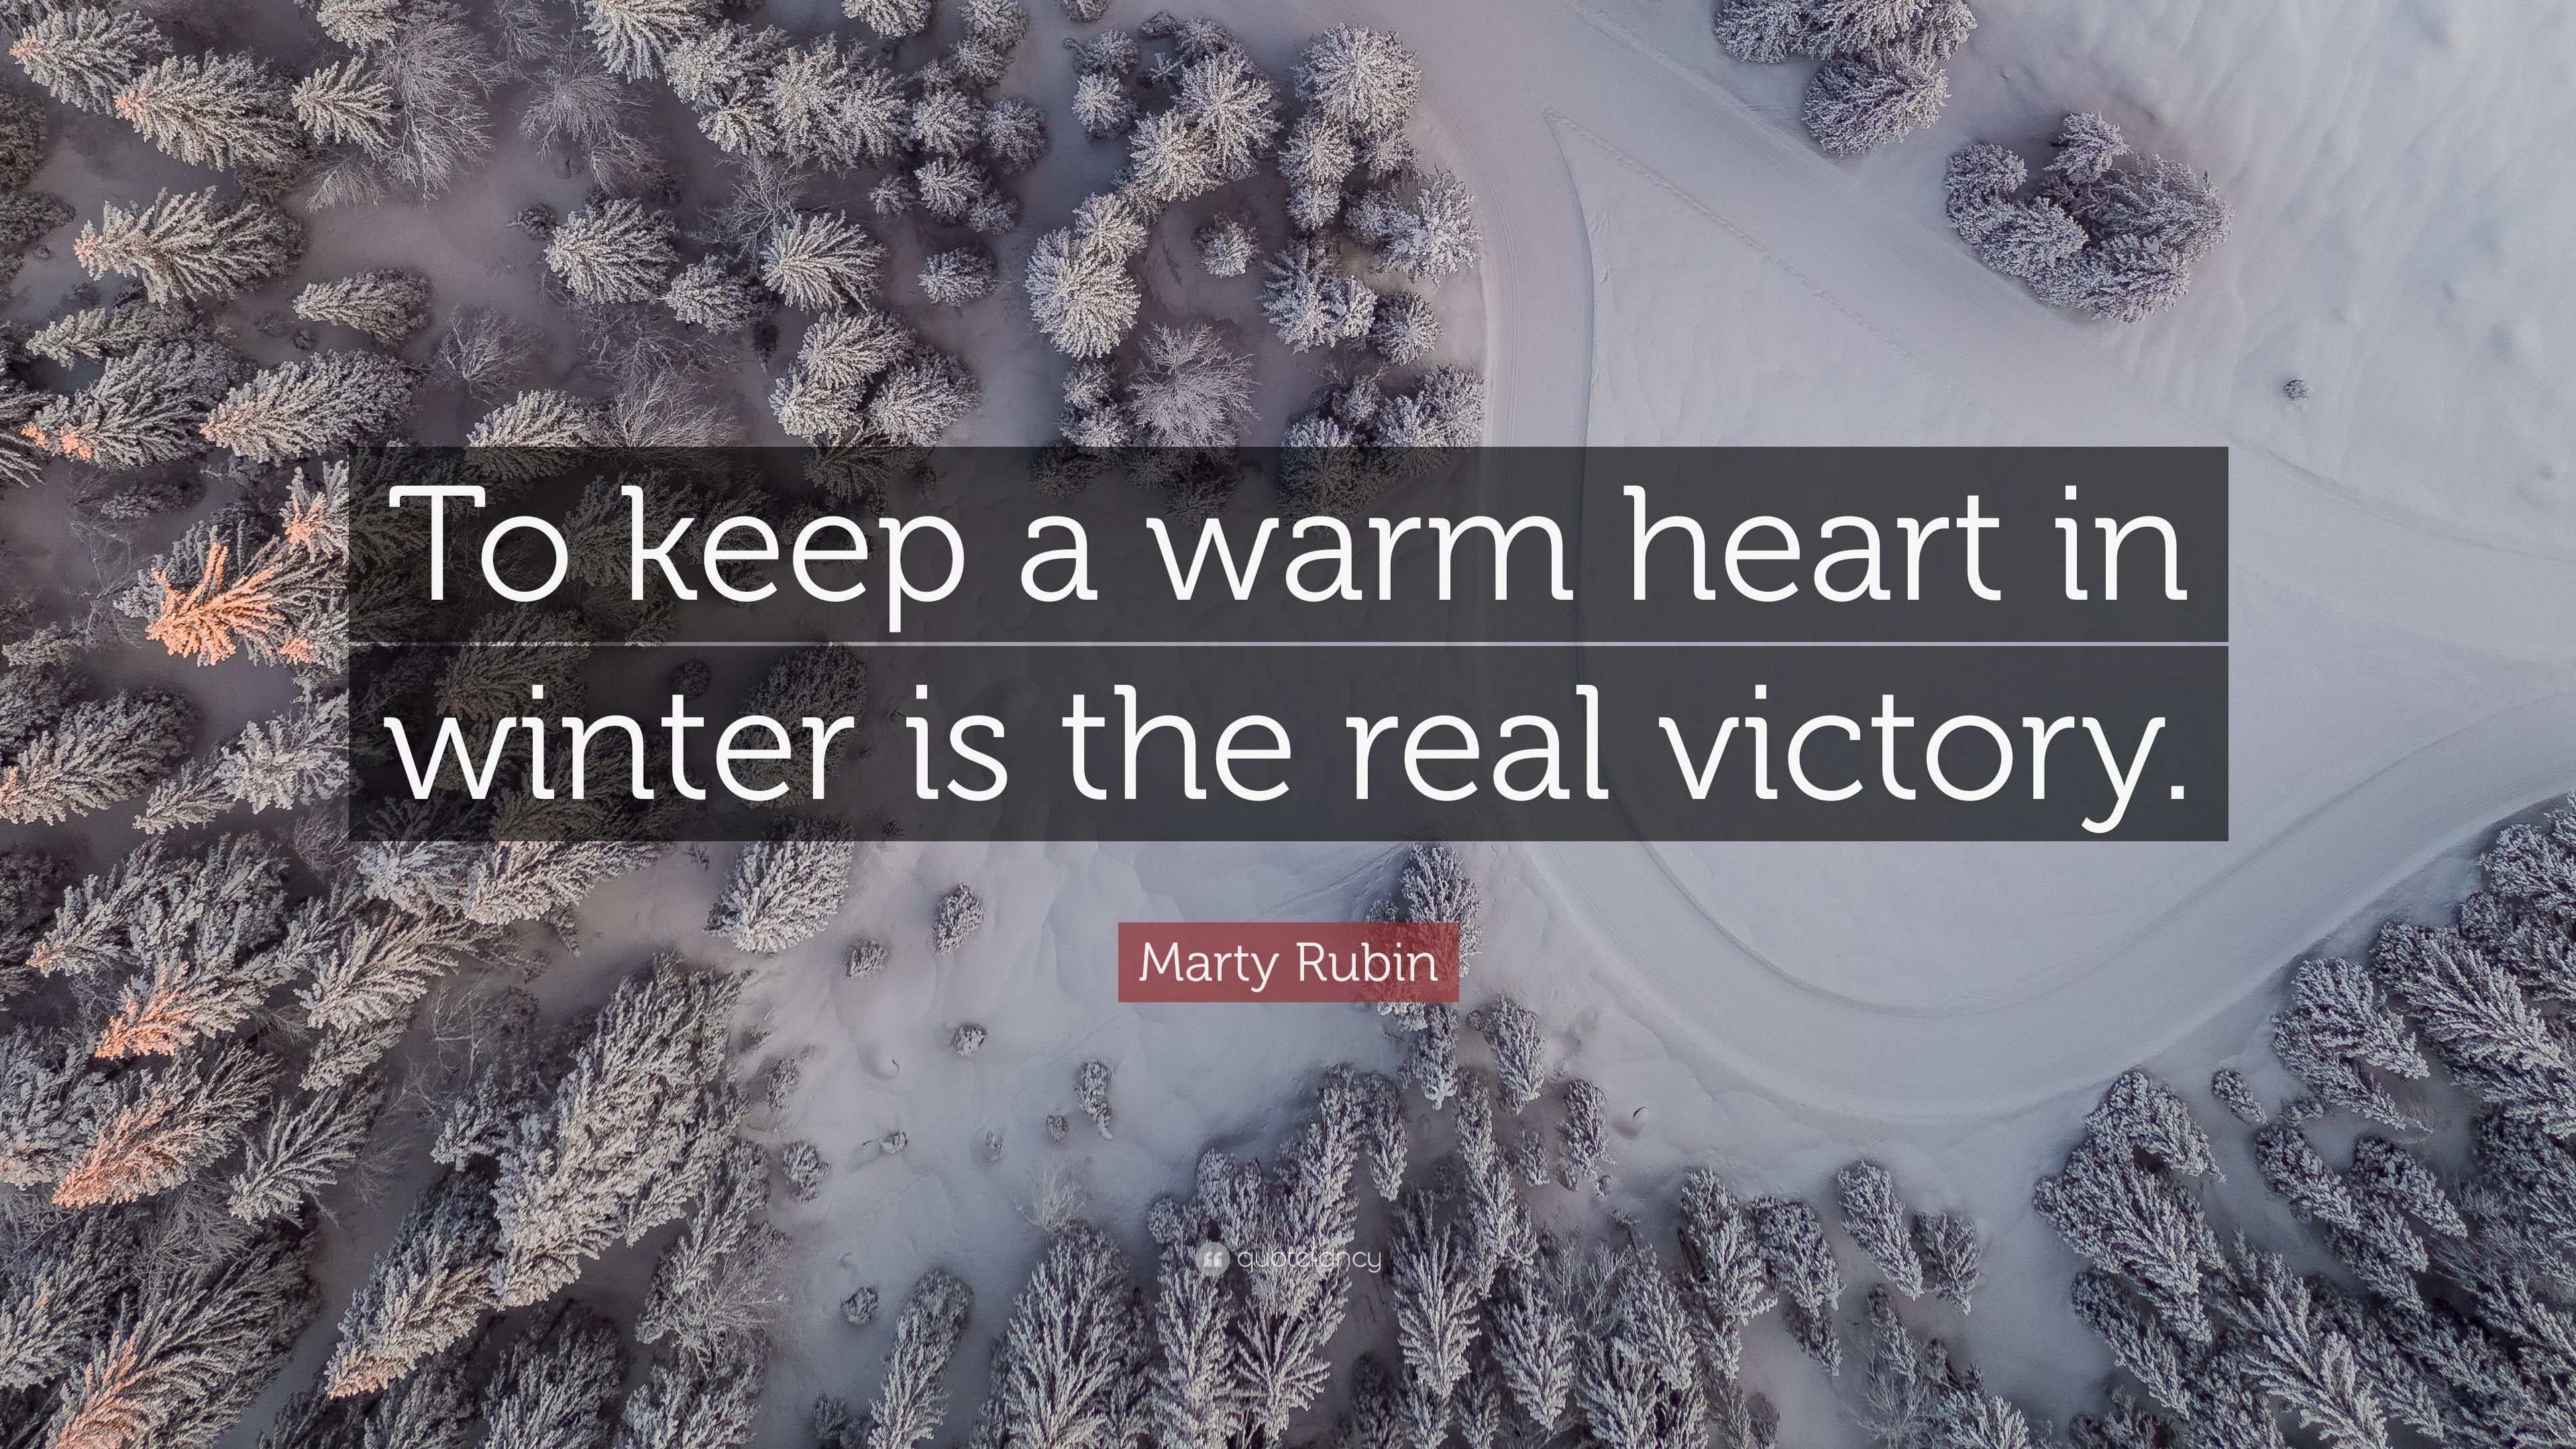 Cozy Winter Quotes That Will Warm Your Heart - Phillips Mallard